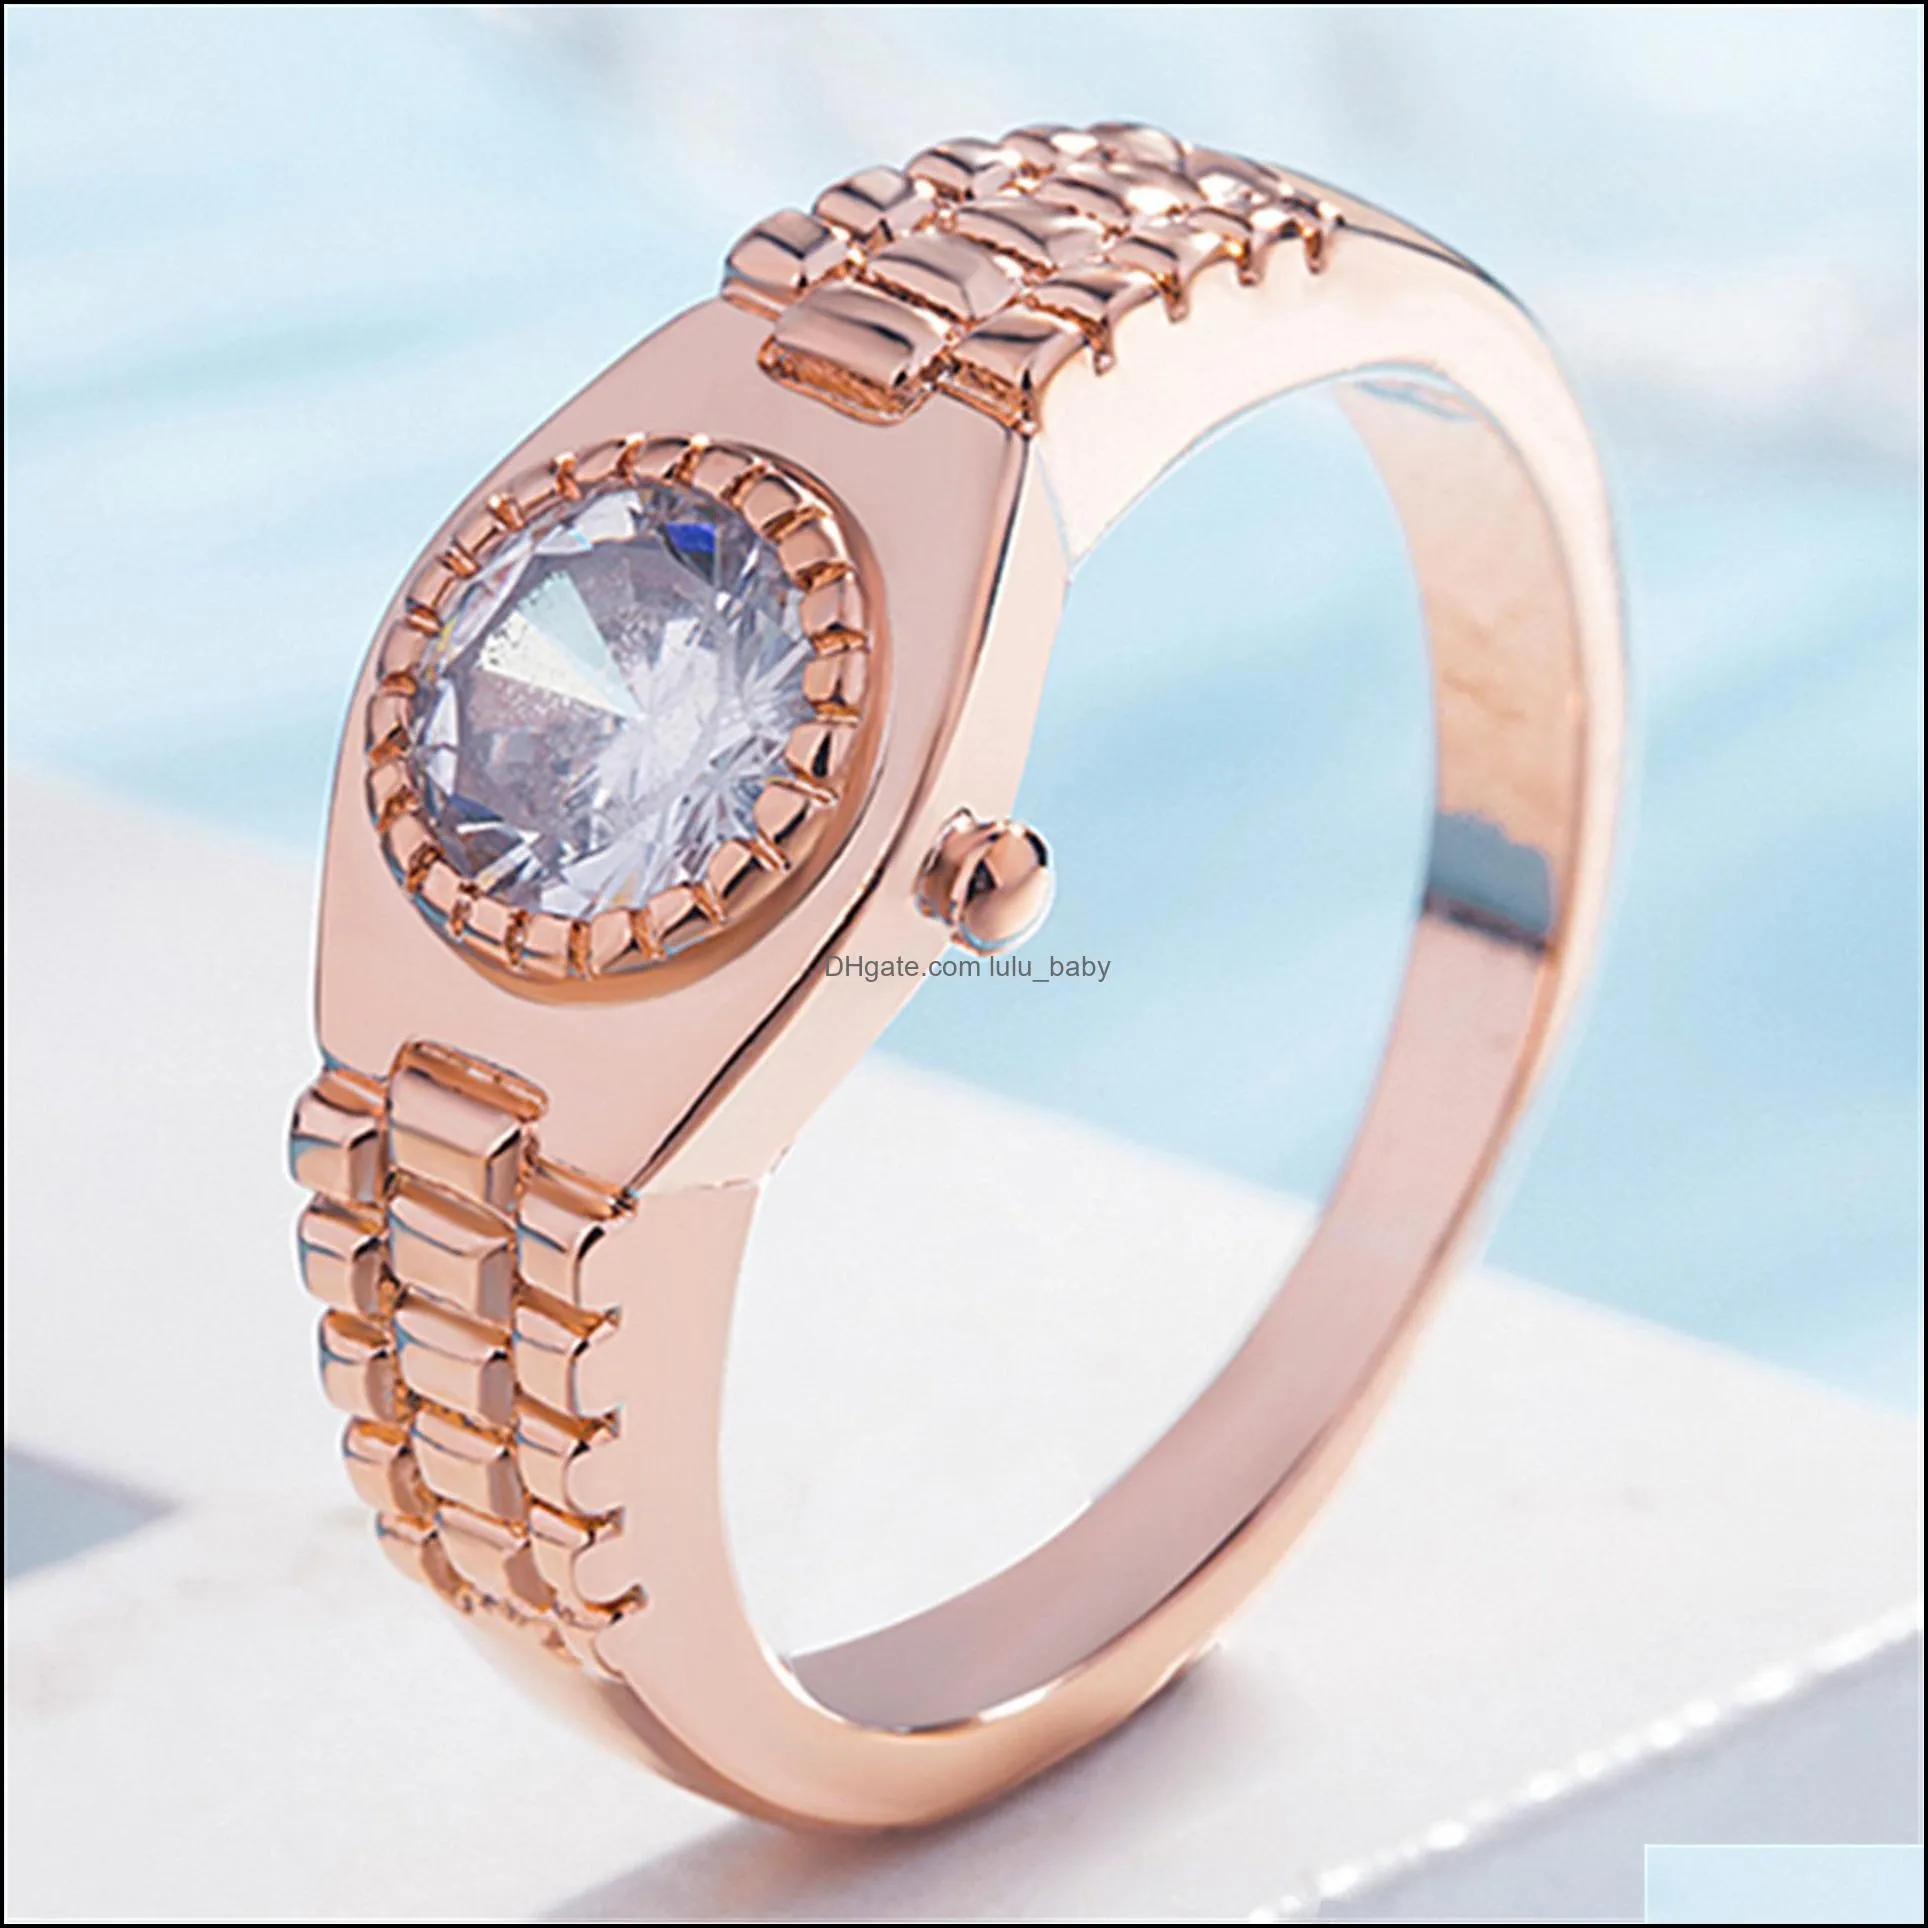 watch ring set white diamond silver ring party birthday gift jewelry fashion watches rings